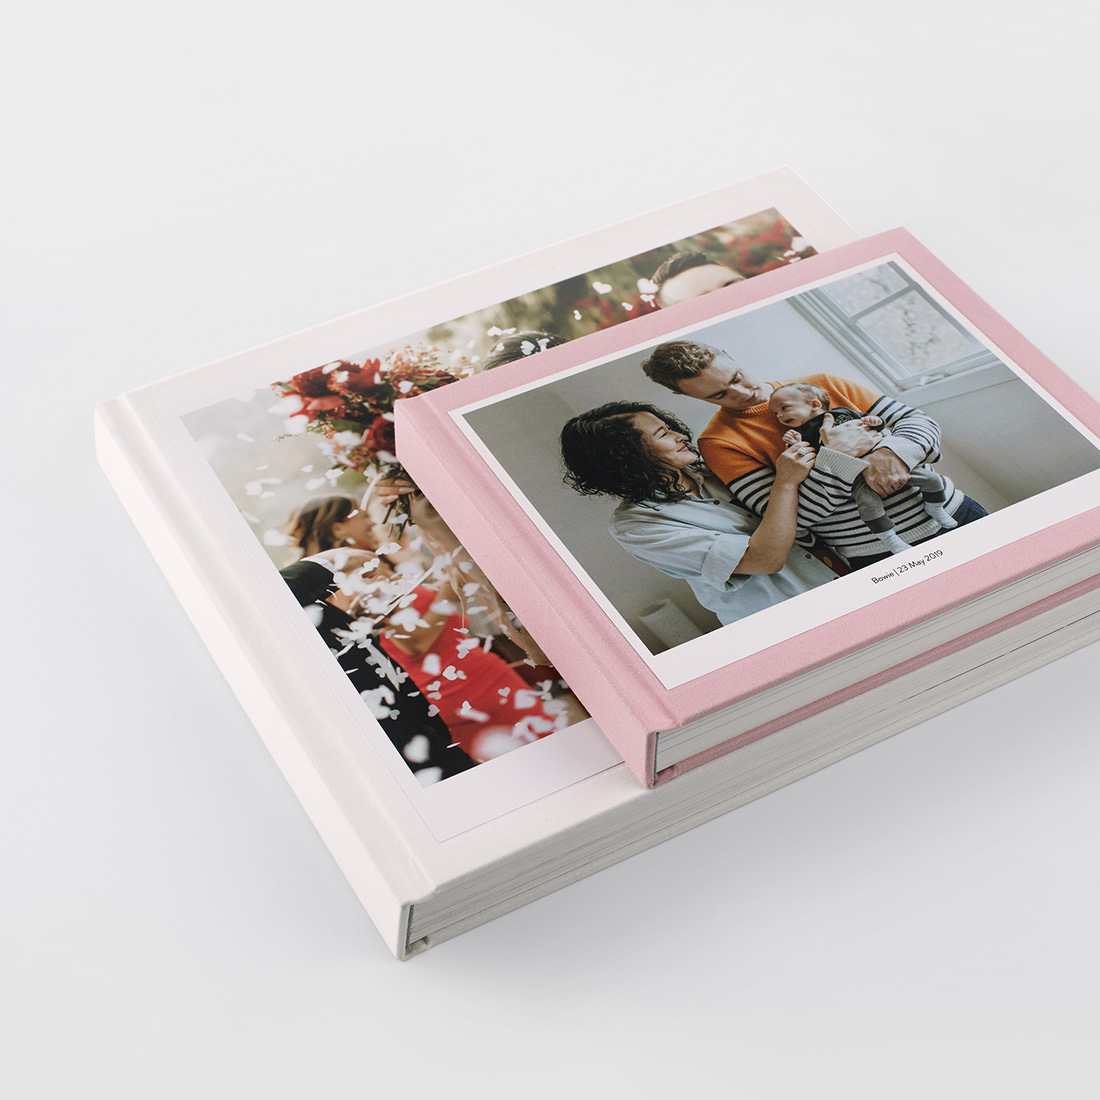 How to mount photos in traditional Photo Albums